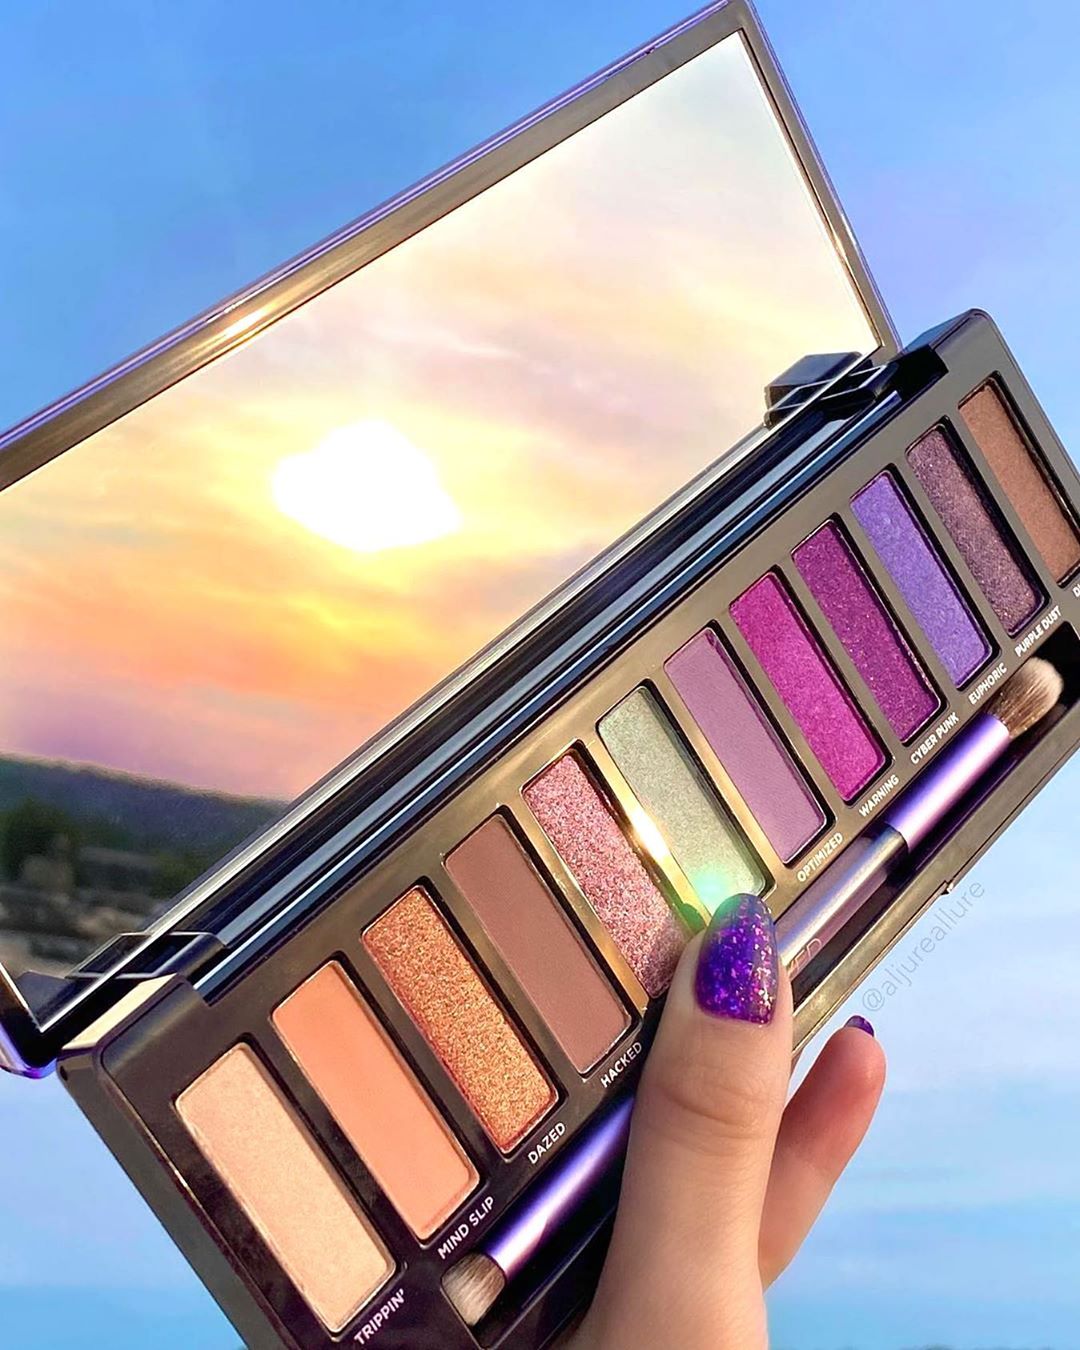 Urban Decay Cosmetics - All the hues of a Cali sunset, right in your hands. Our all-new NAKED Ultraviolet Eyeshadow Palette is the perfect color story 💜 Tap to shop! #UrbanDecay #NAKEDUltraviolet #All...